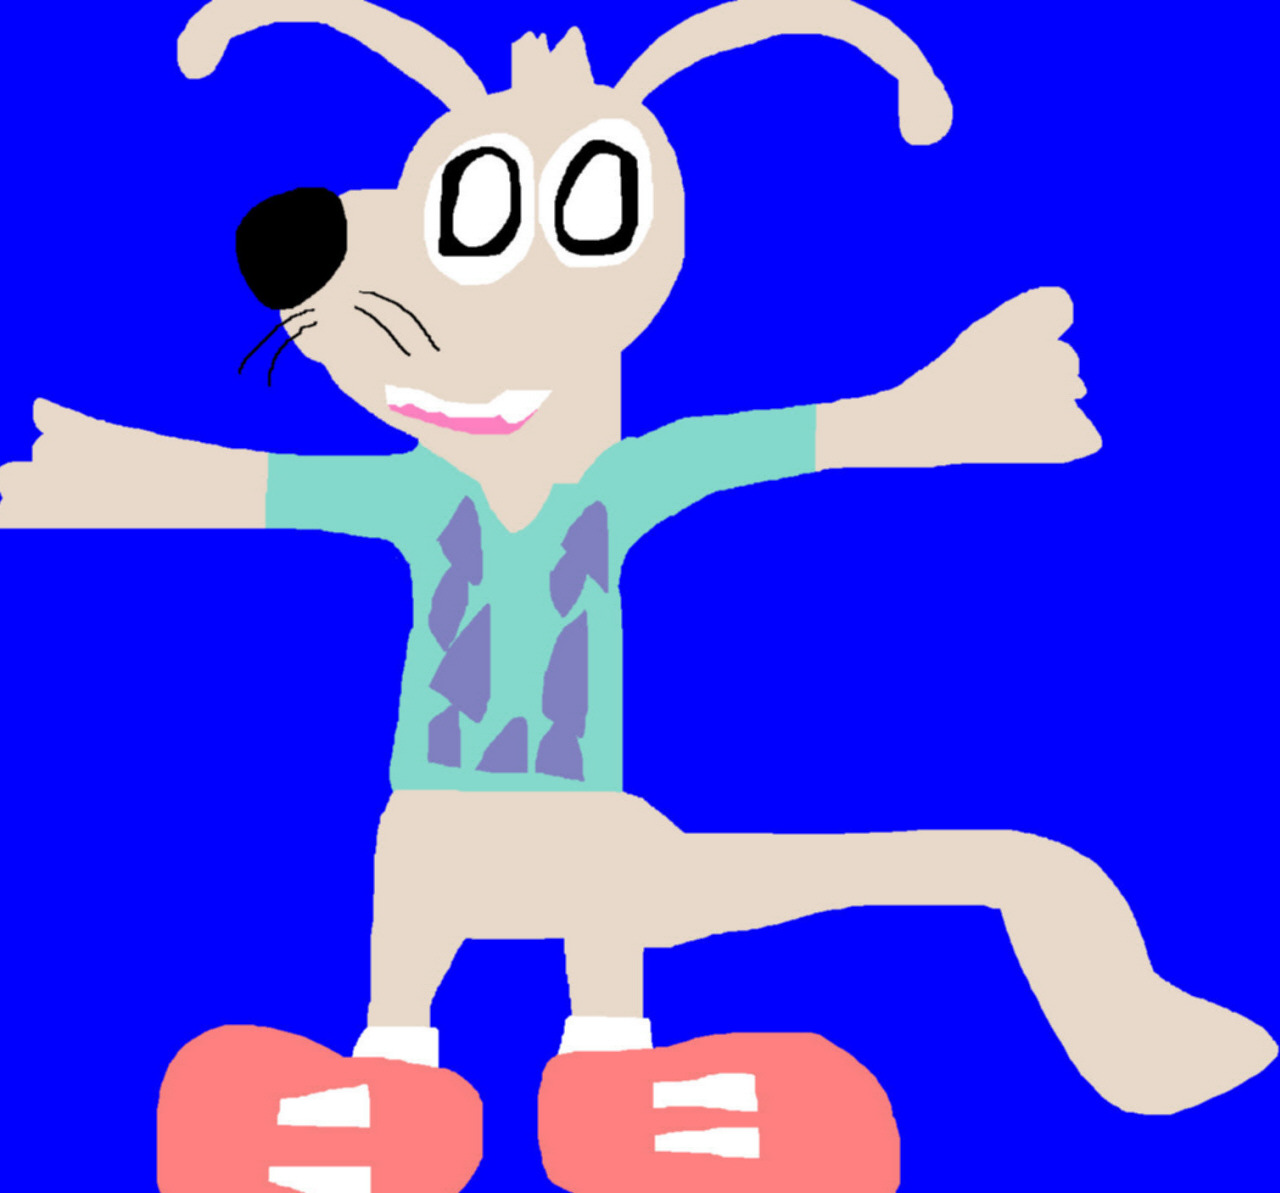 Random Rocko With Whiskers MS Paint by Falconlobo